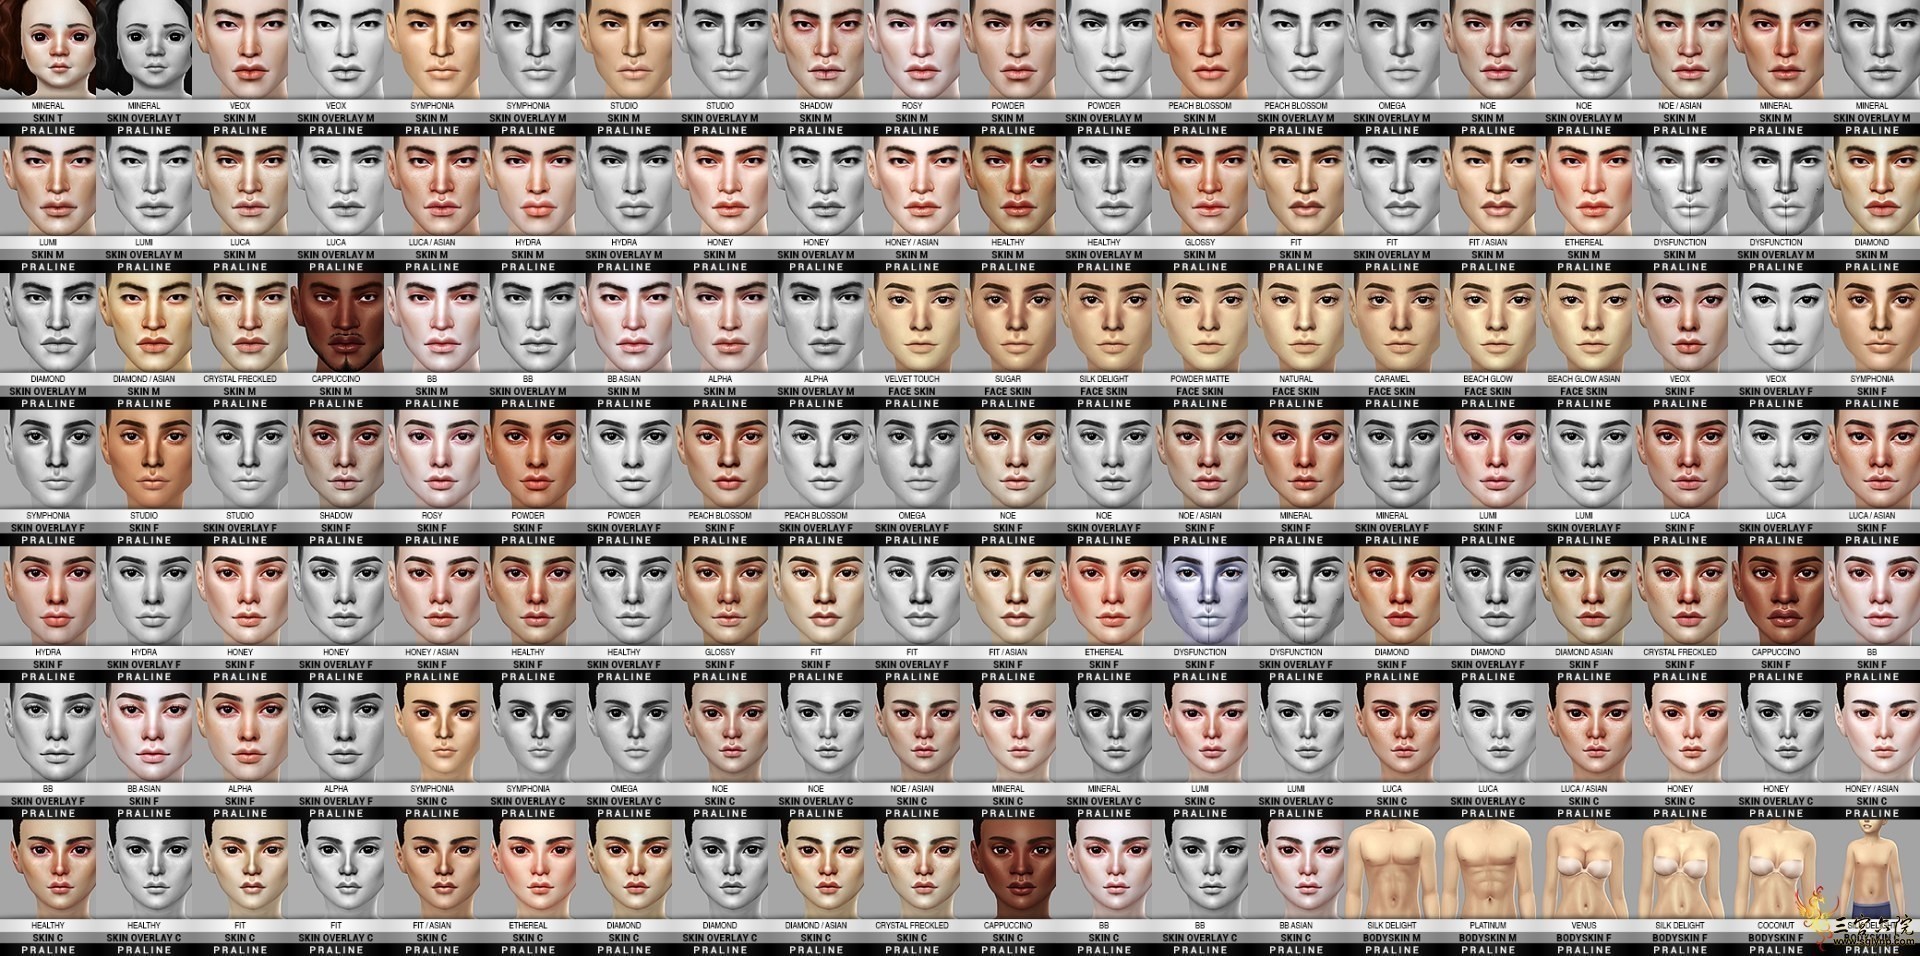 Pralinesims_UltimateOldSkinCollection.png